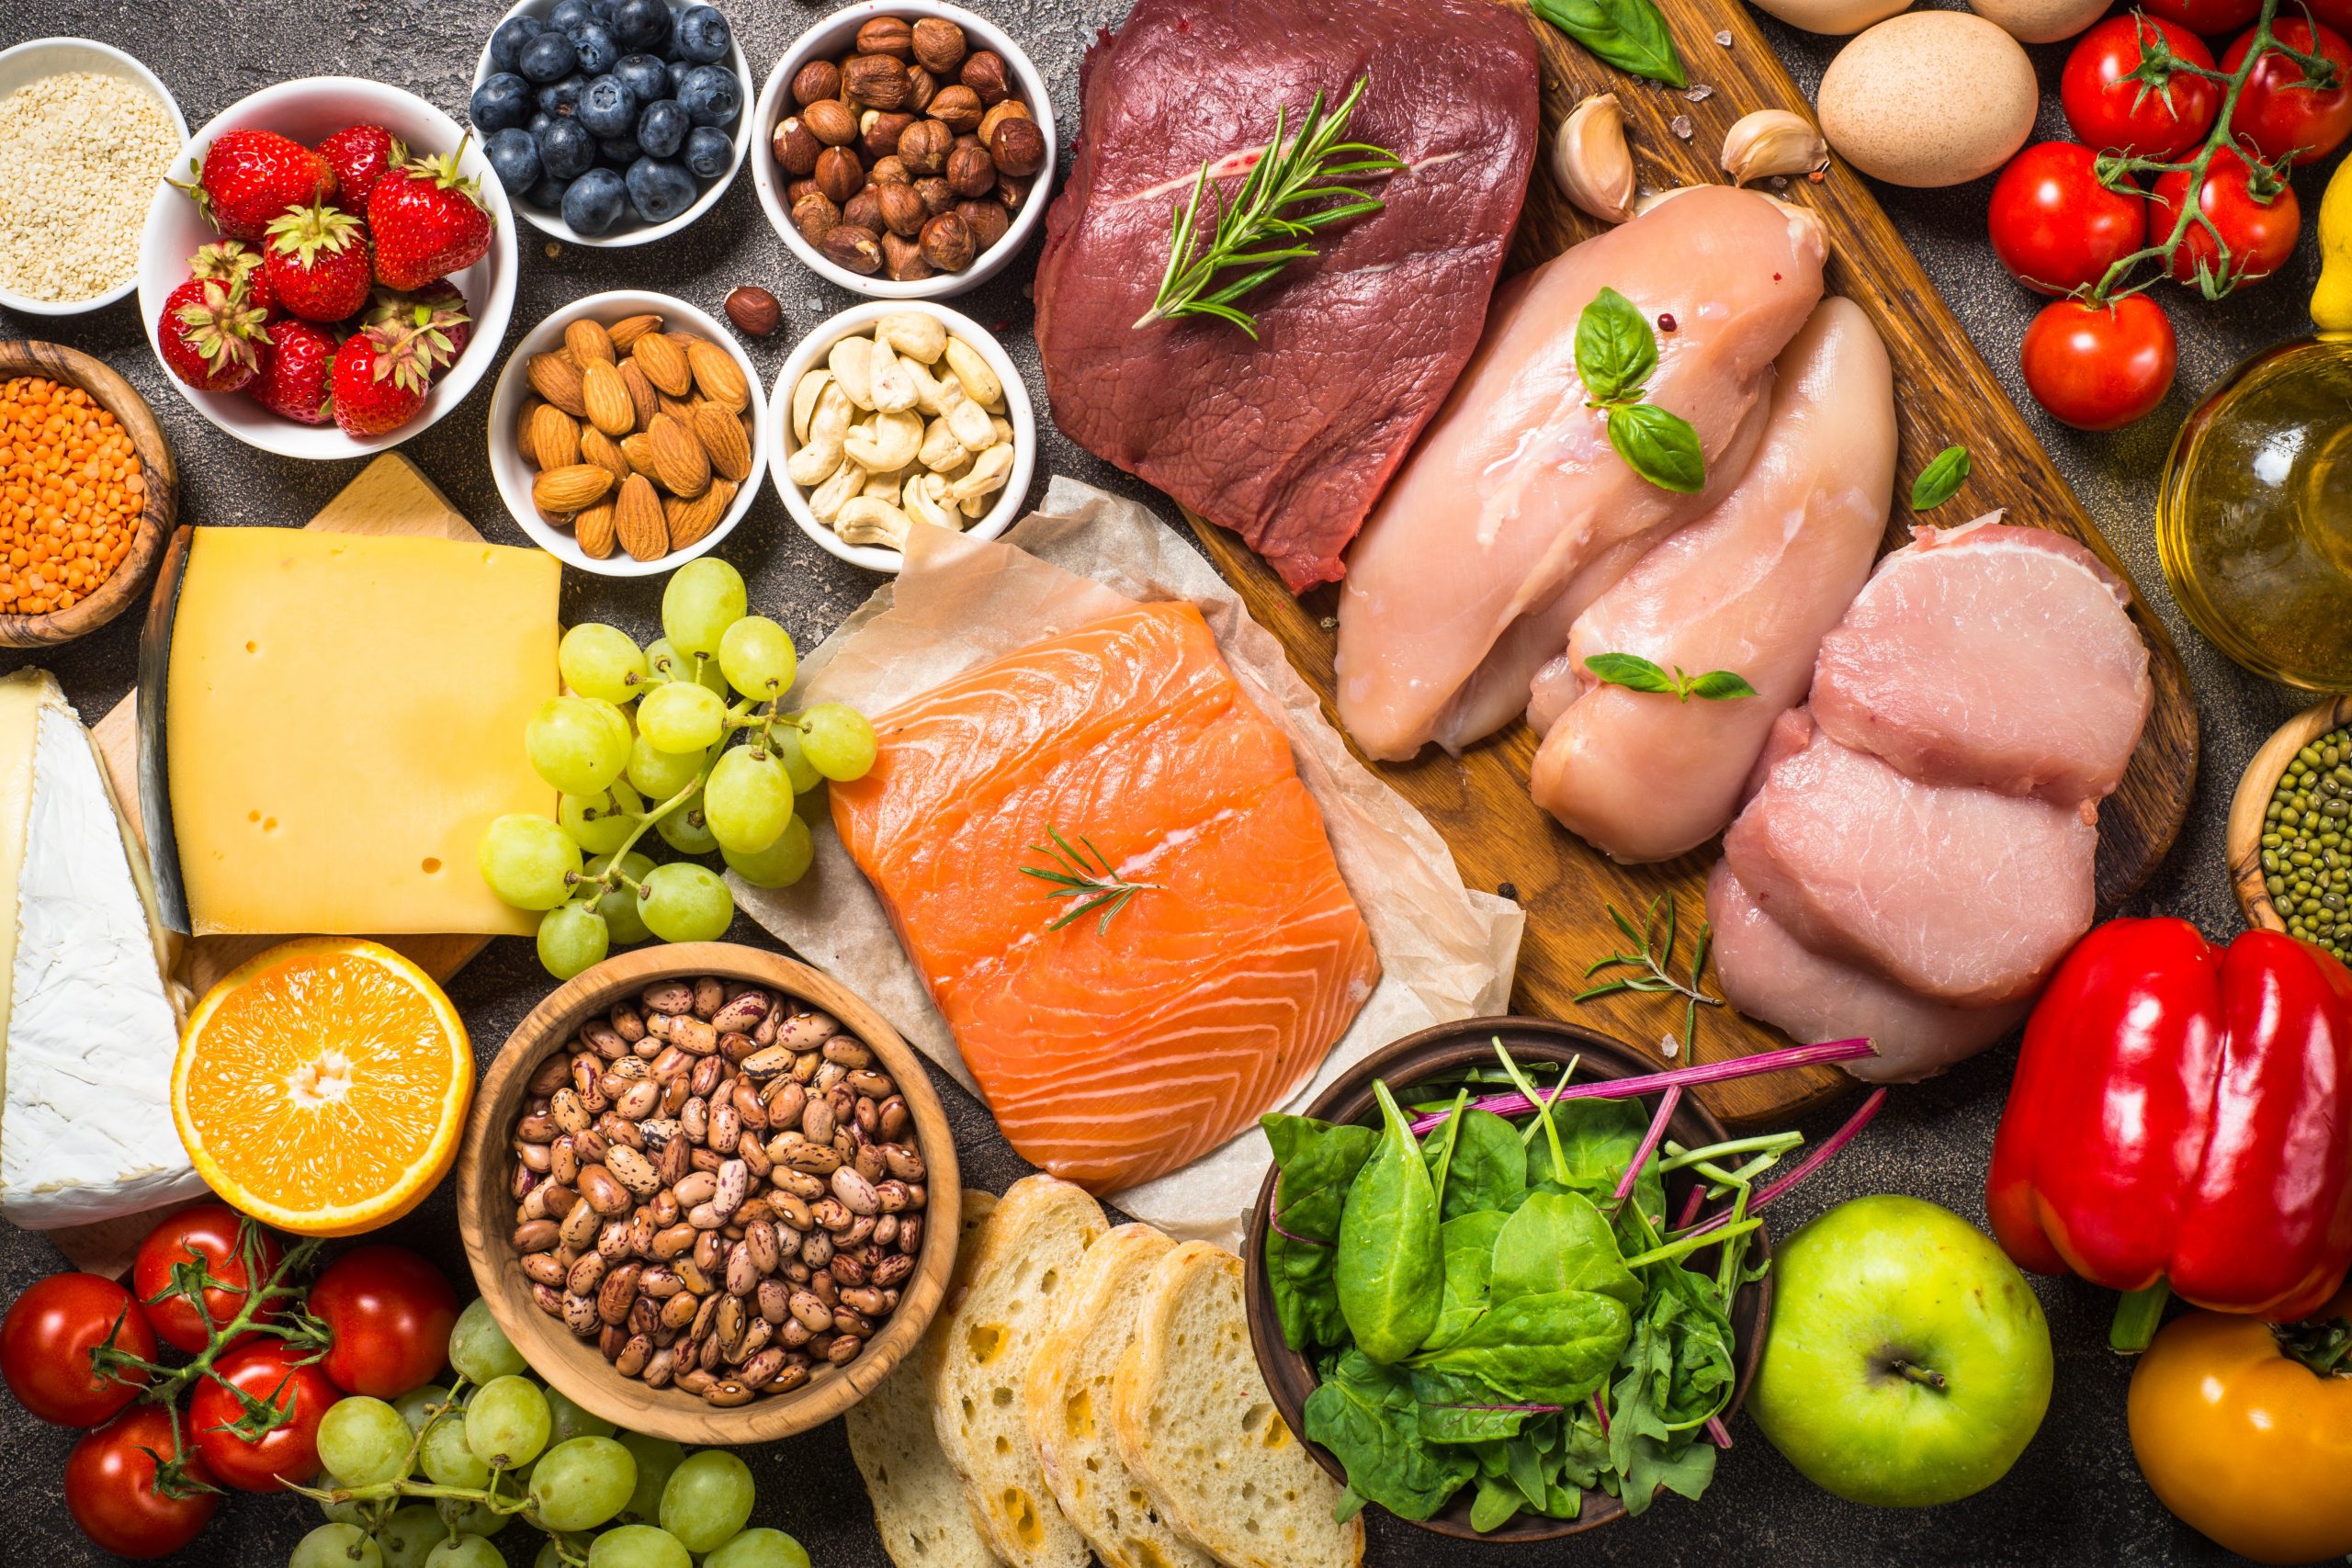 Balancing Proteins, Fats, and Carbs: The Key to a Healthy Diet